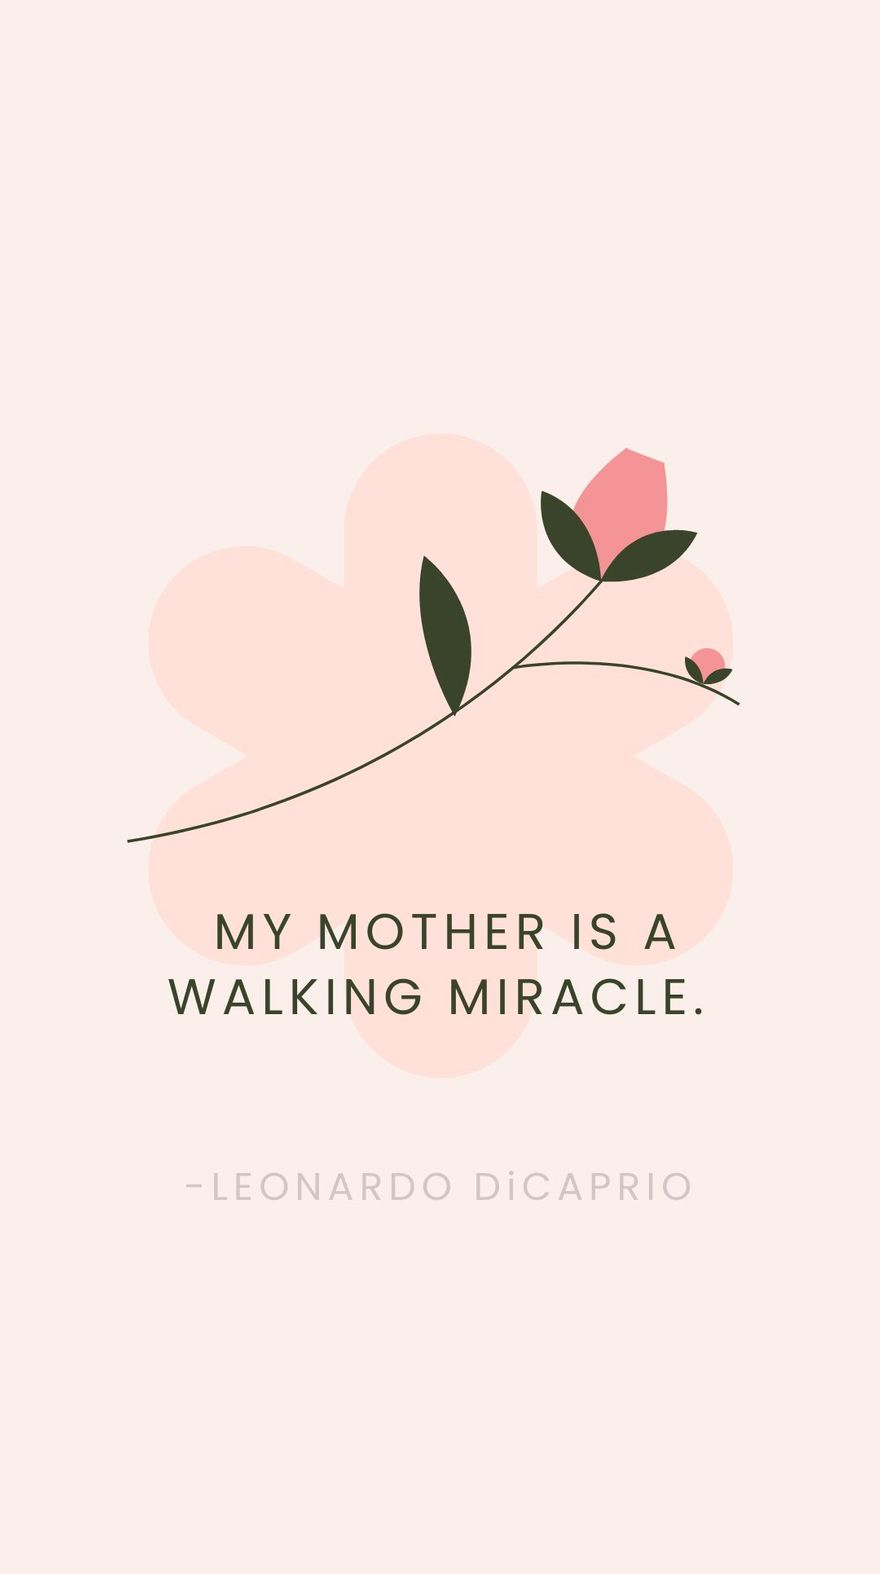 Leonardo DiCaprio - My mother is a walking miracle. 